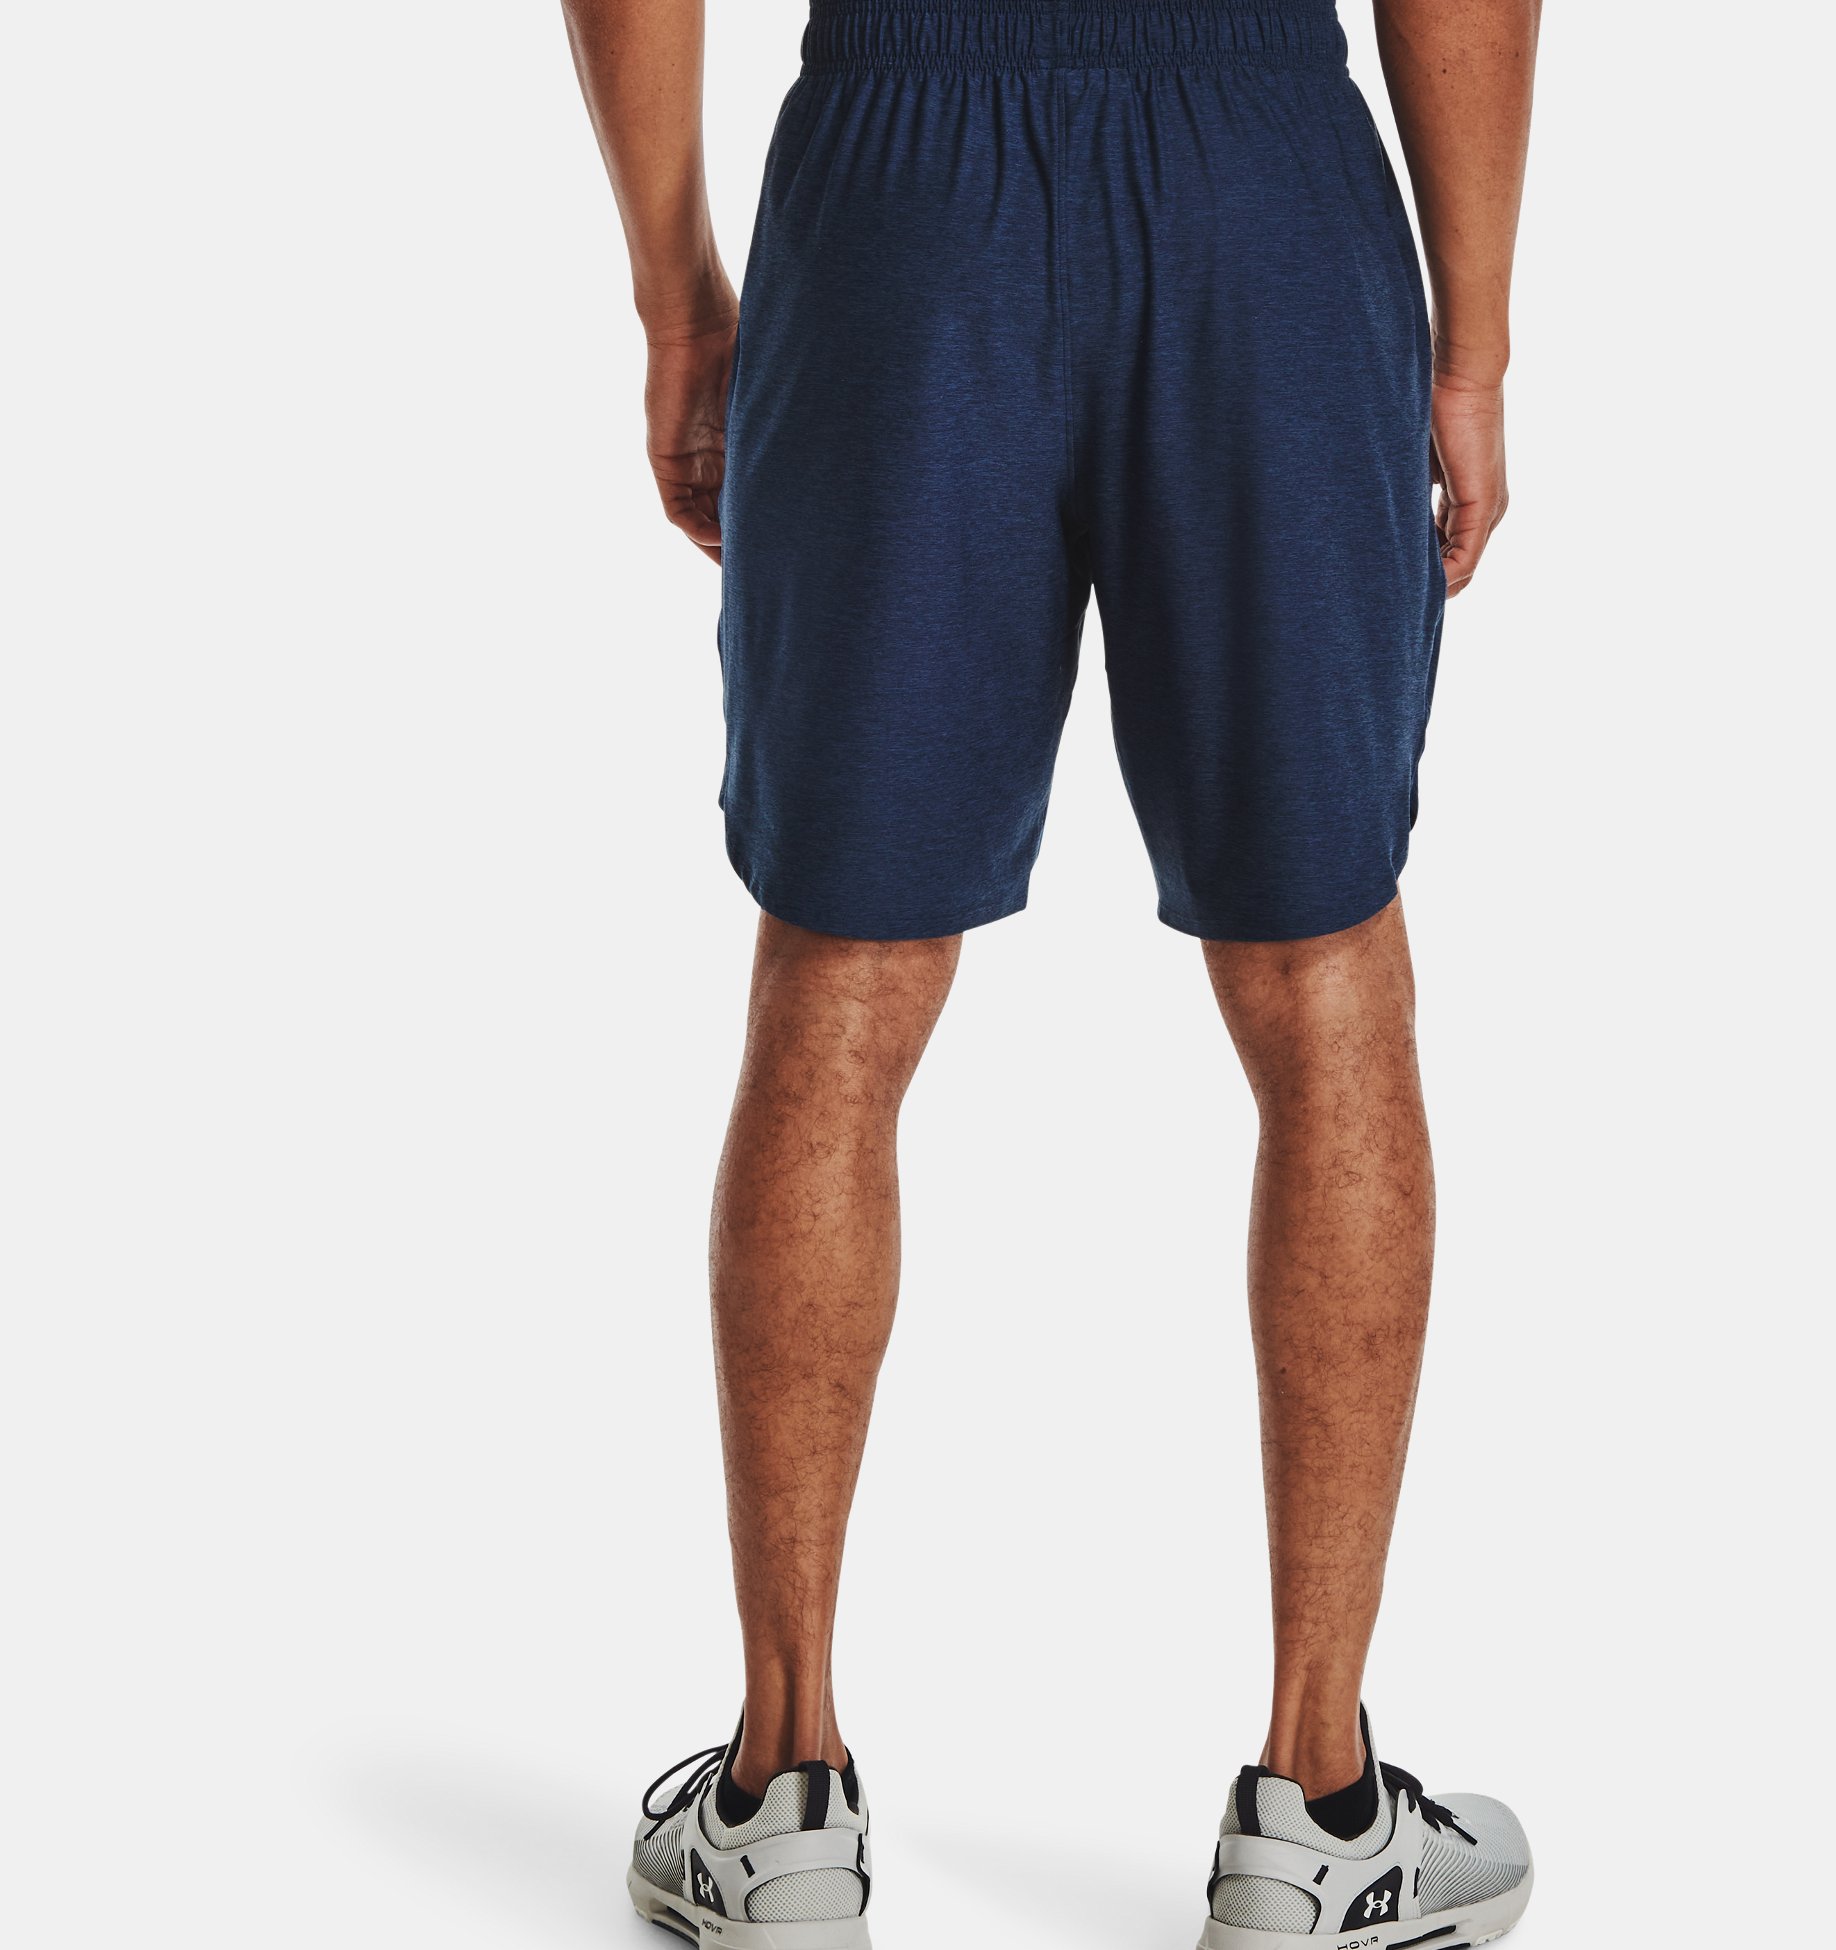 Under Armour Mens Train Stretch Shorts Breathable and Comfortable Gym Shorts with Anti-Odour Technology Lightweight and Soft Sports Shorts with 4-Way Stretch 